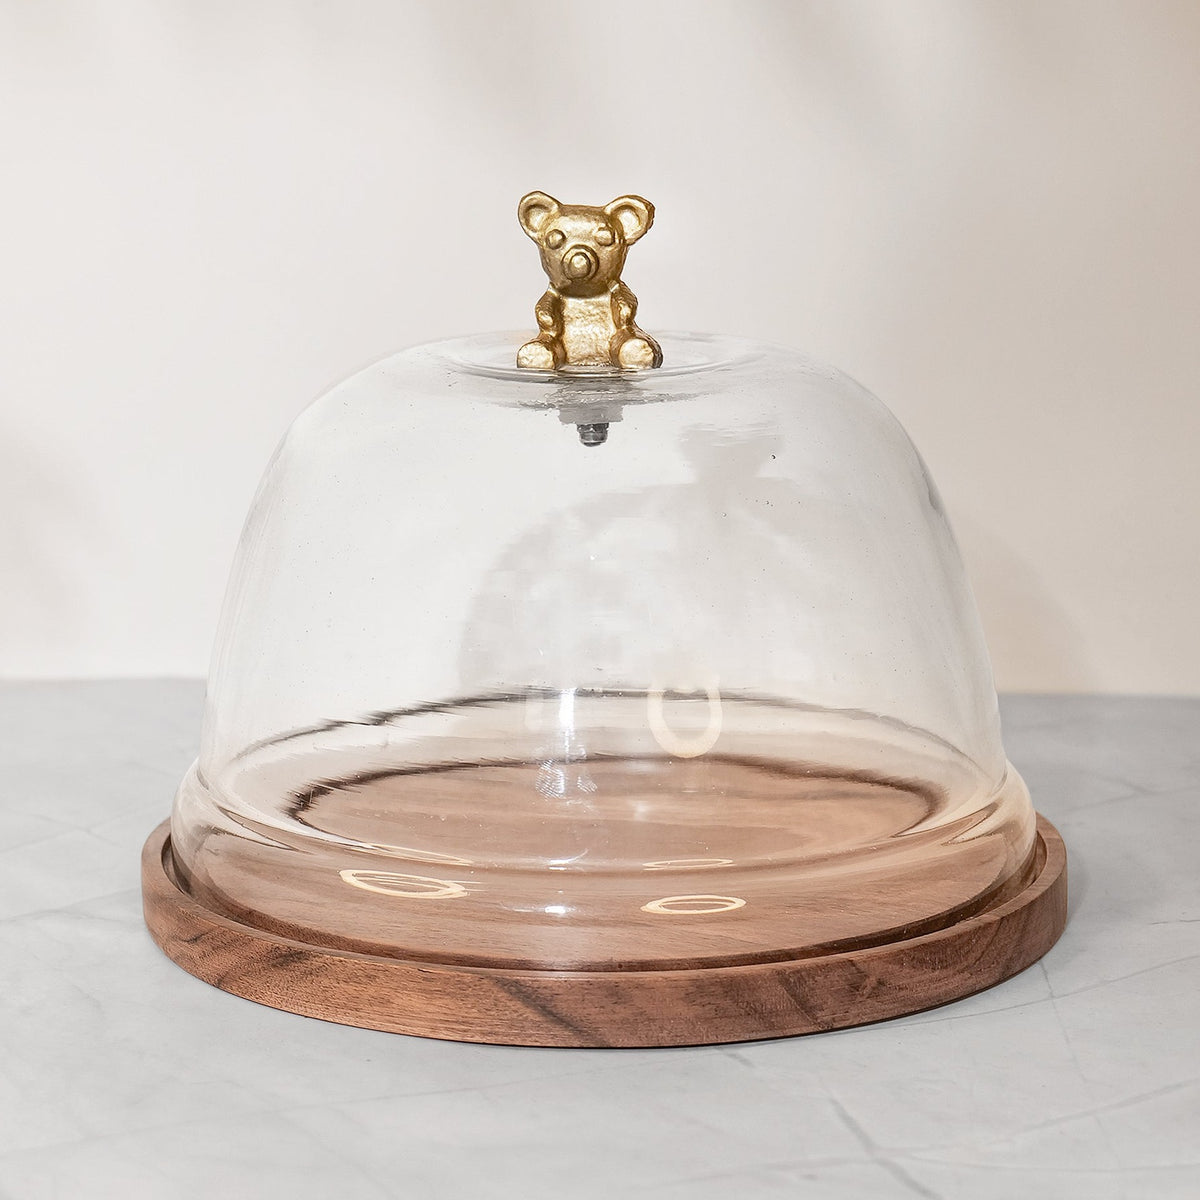 Functional Serving Platter & Cake Container with Dome - 8 inch